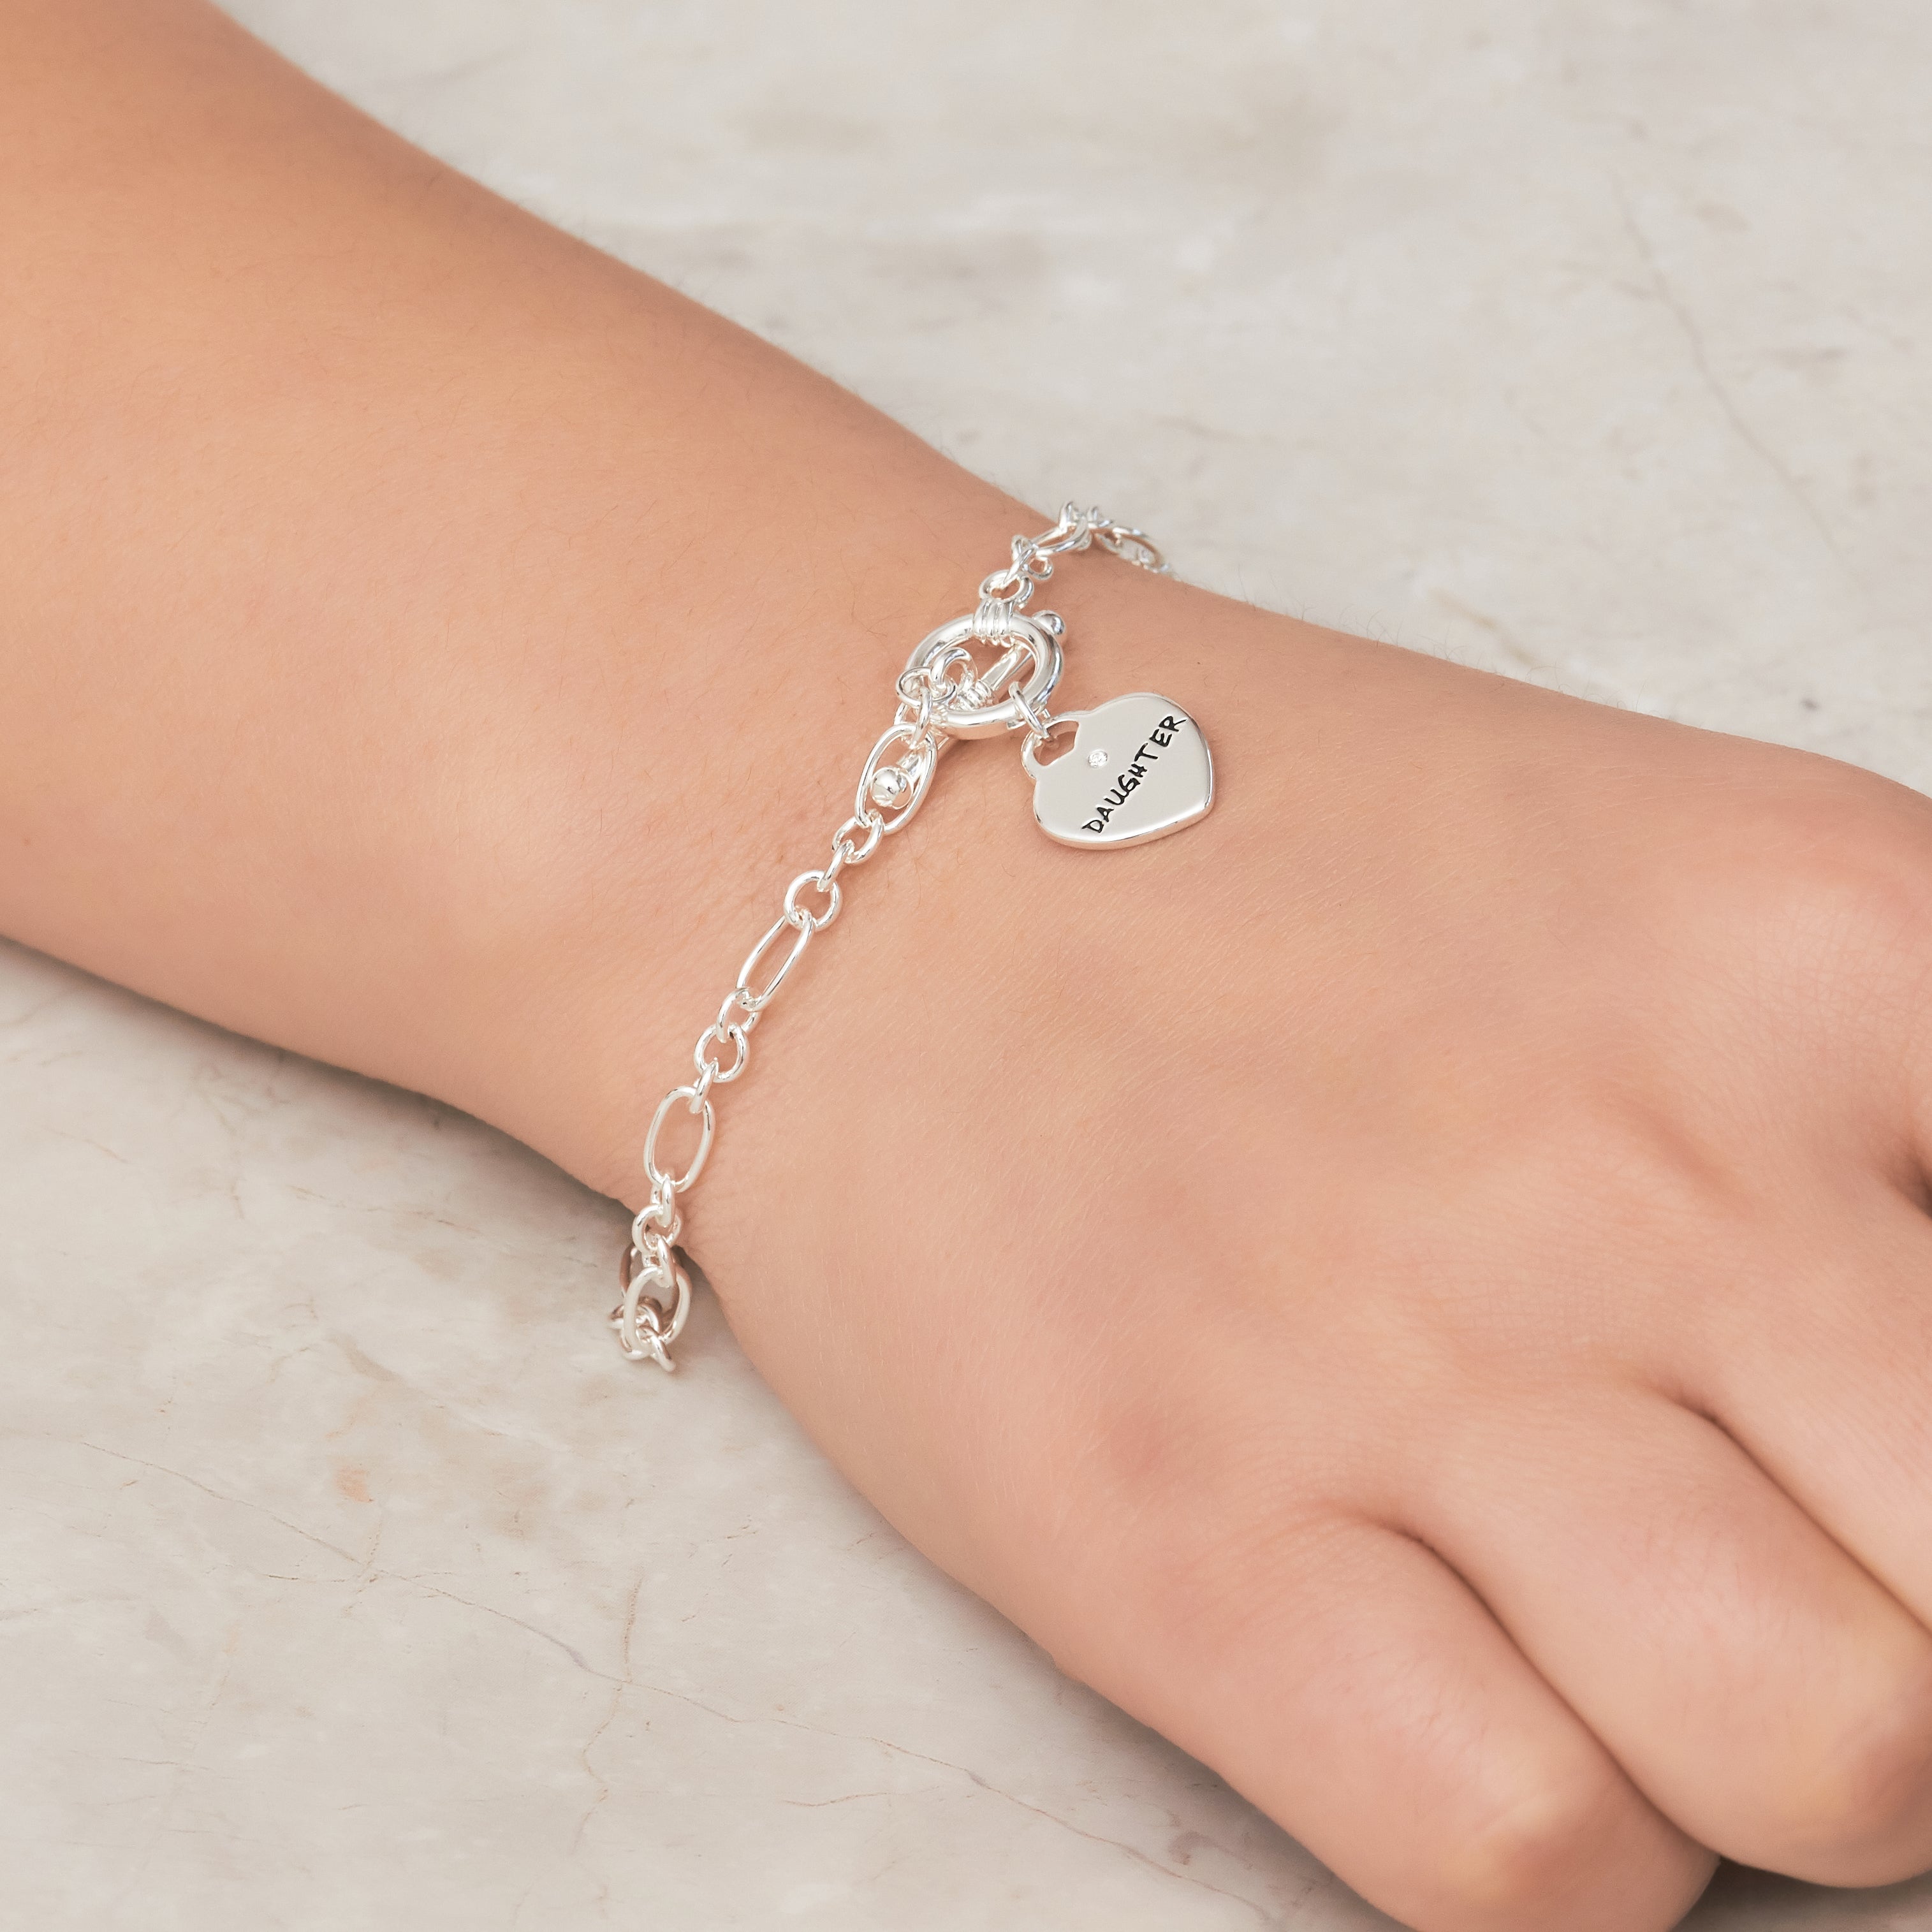 Daughter Charm Bracelet Created with Zircondia® Crystals